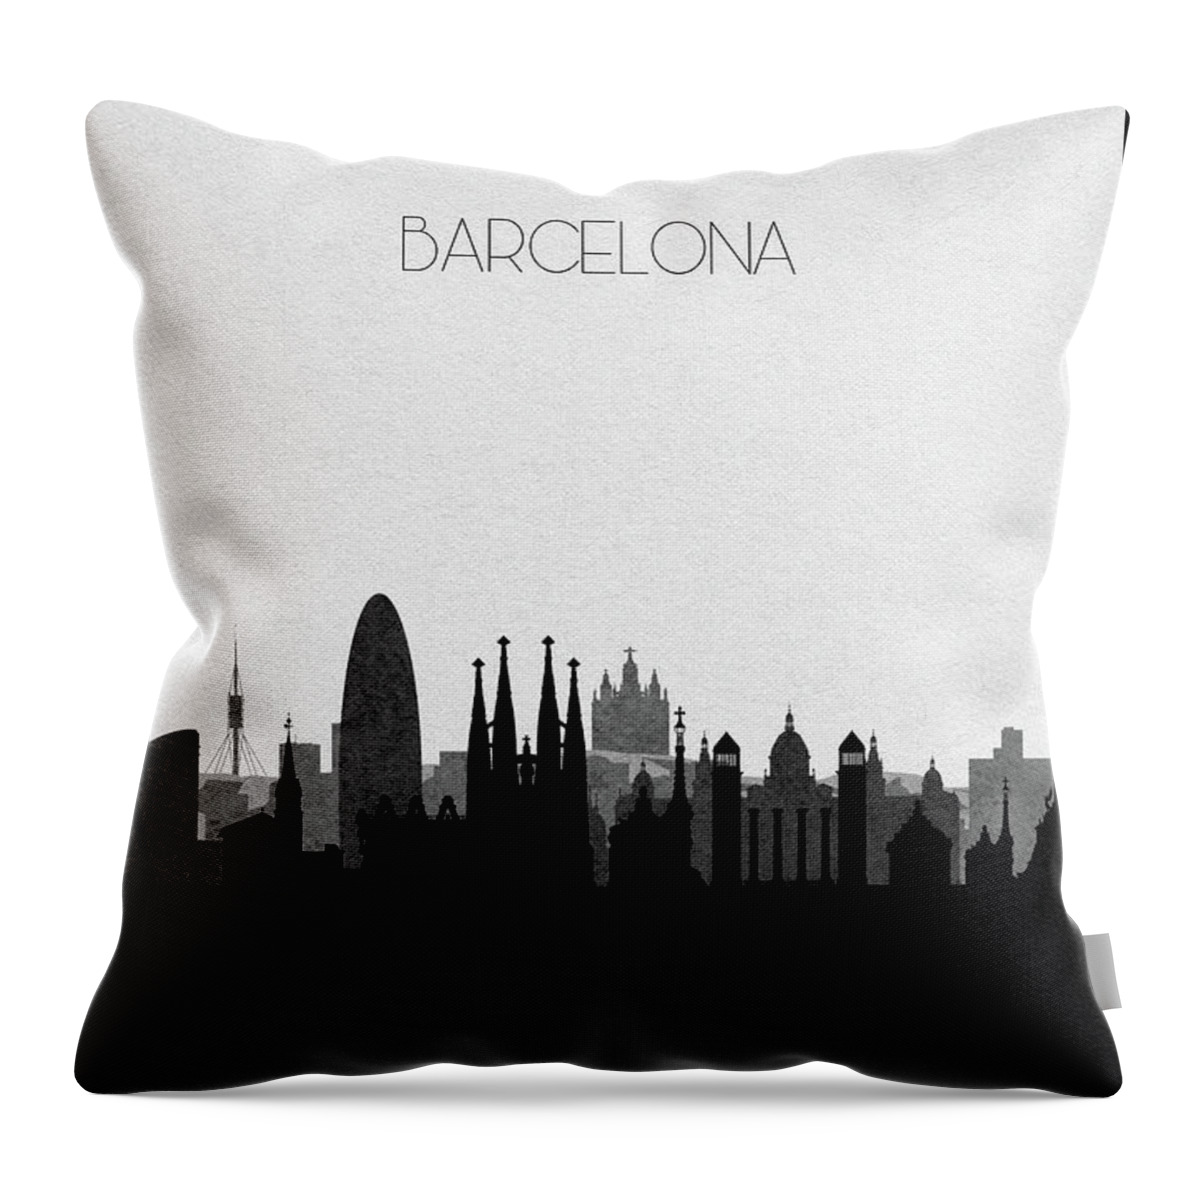 Barcelona Throw Pillow featuring the drawing Barcelona Cityscape Art by Inspirowl Design